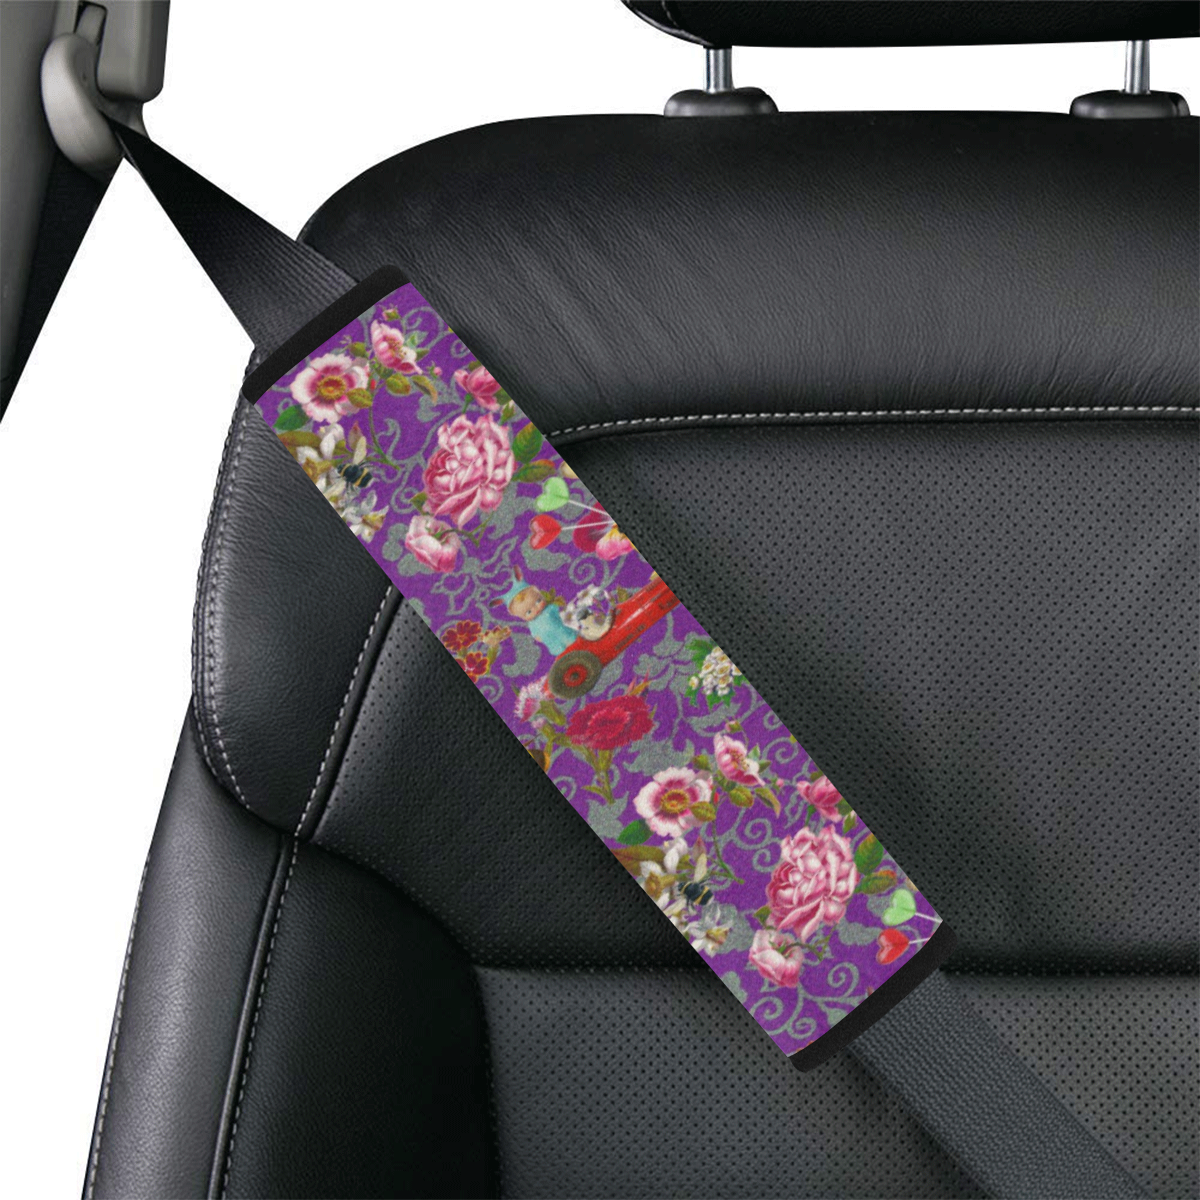 Spring Bank Holiday Car Seat Belt Cover 7''x12.6''